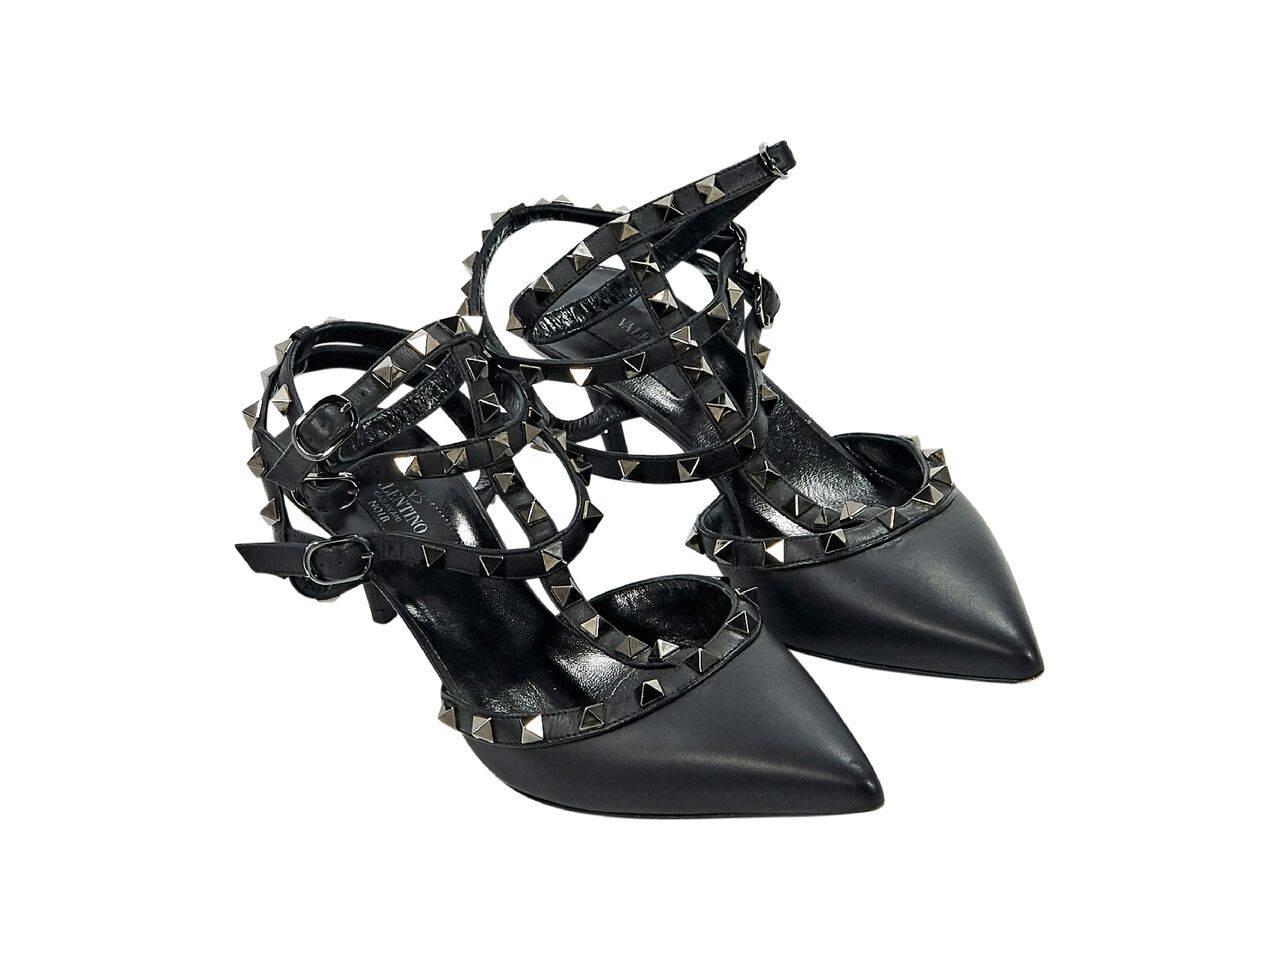 Product details:  Black leather Rockstud kitten heels by Valentino.  Accented with pyramid studs.  Triple adjustable ankle straps.  Point toe.  Gunmetal-tone hardware. 
Condition: Pre-owned. Very good.
Est. Retail $ 995.00